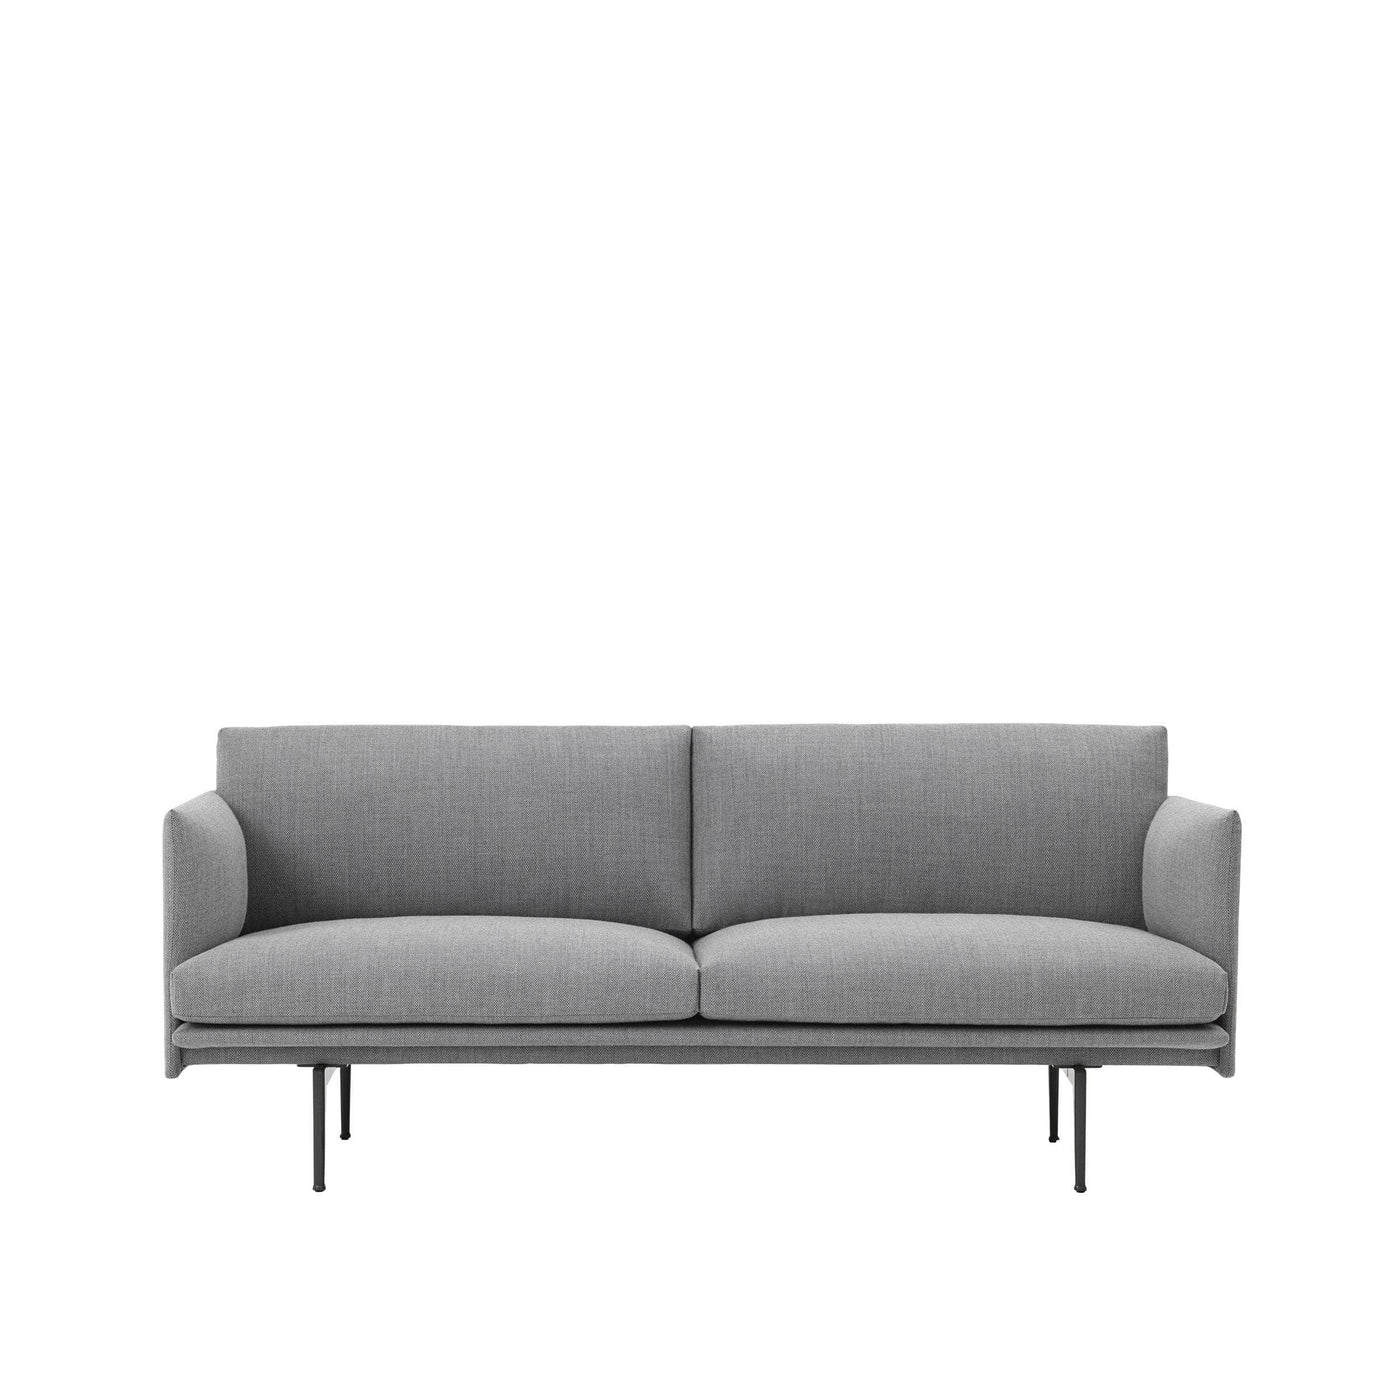 Muuto Outline 2 seater sofa in Fiord 151 grey. Made to order from someday designs